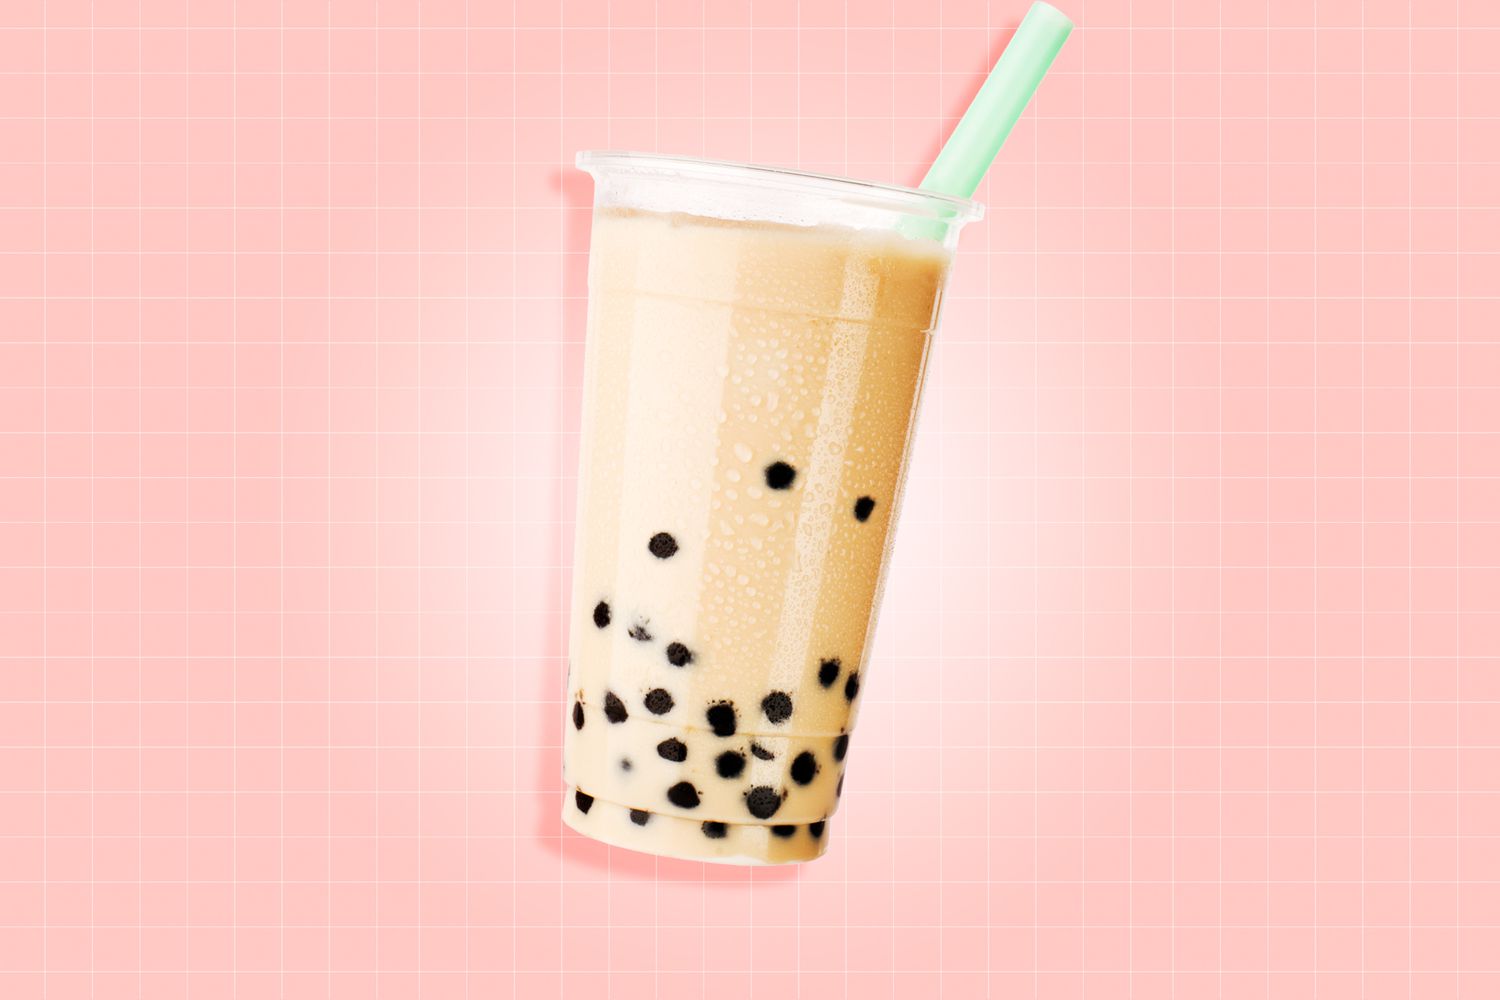 bubble tea with milk and tapioca pearls on a designed background